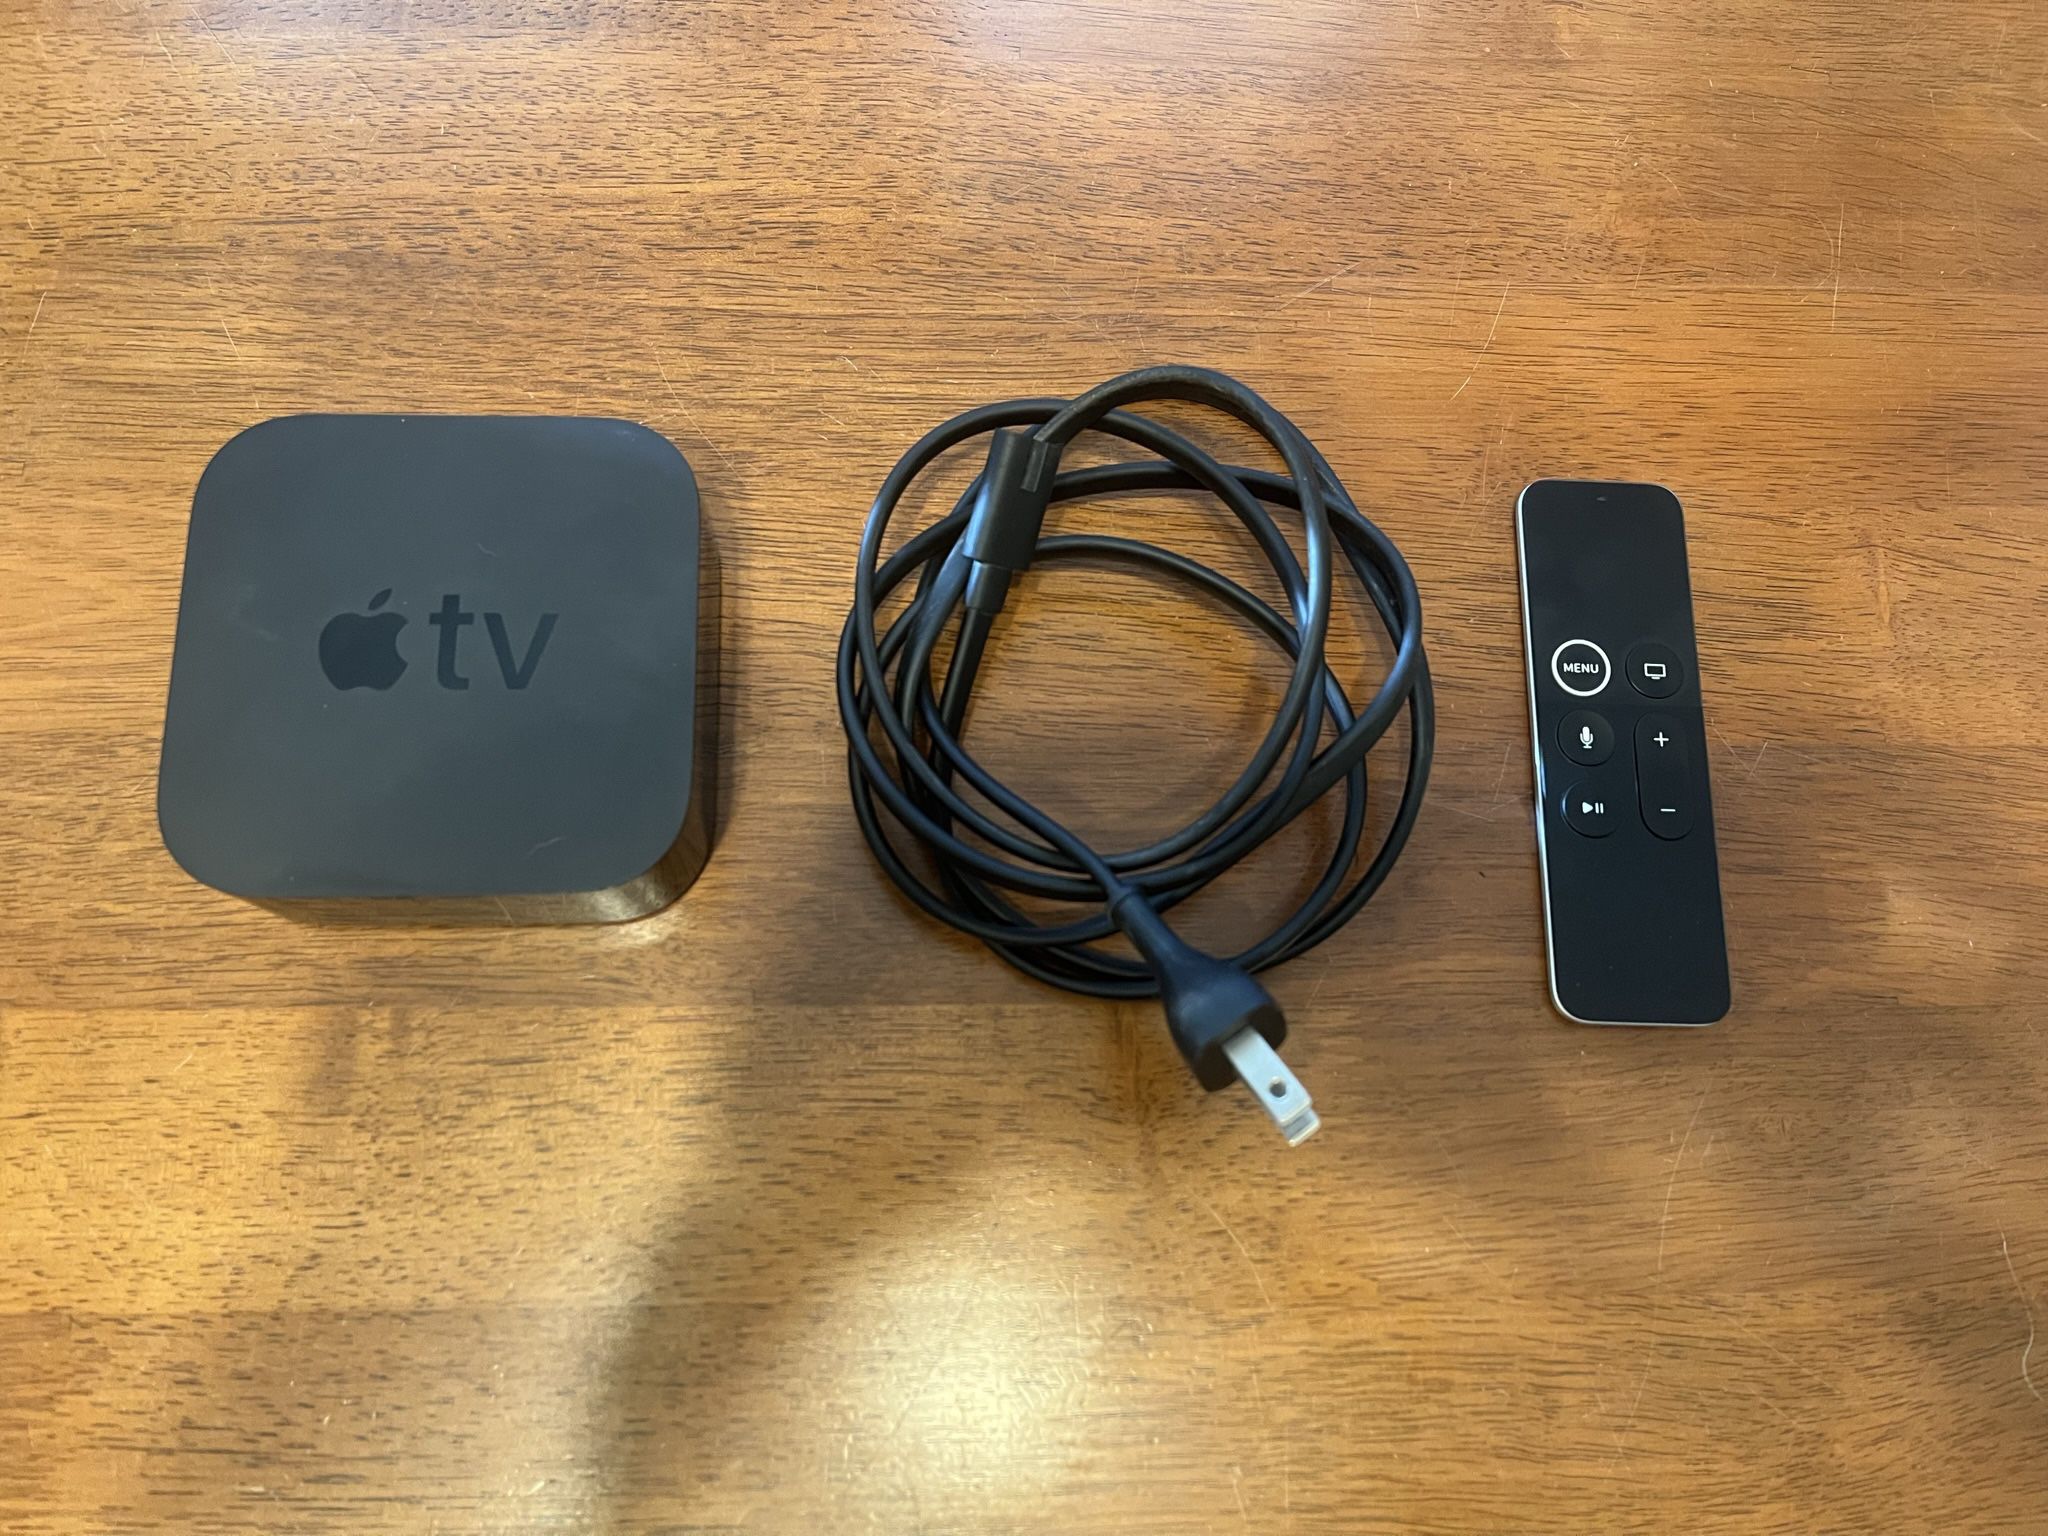 Apple TV 4K A1842 32GB for Sale in Raleigh, NC - OfferUp